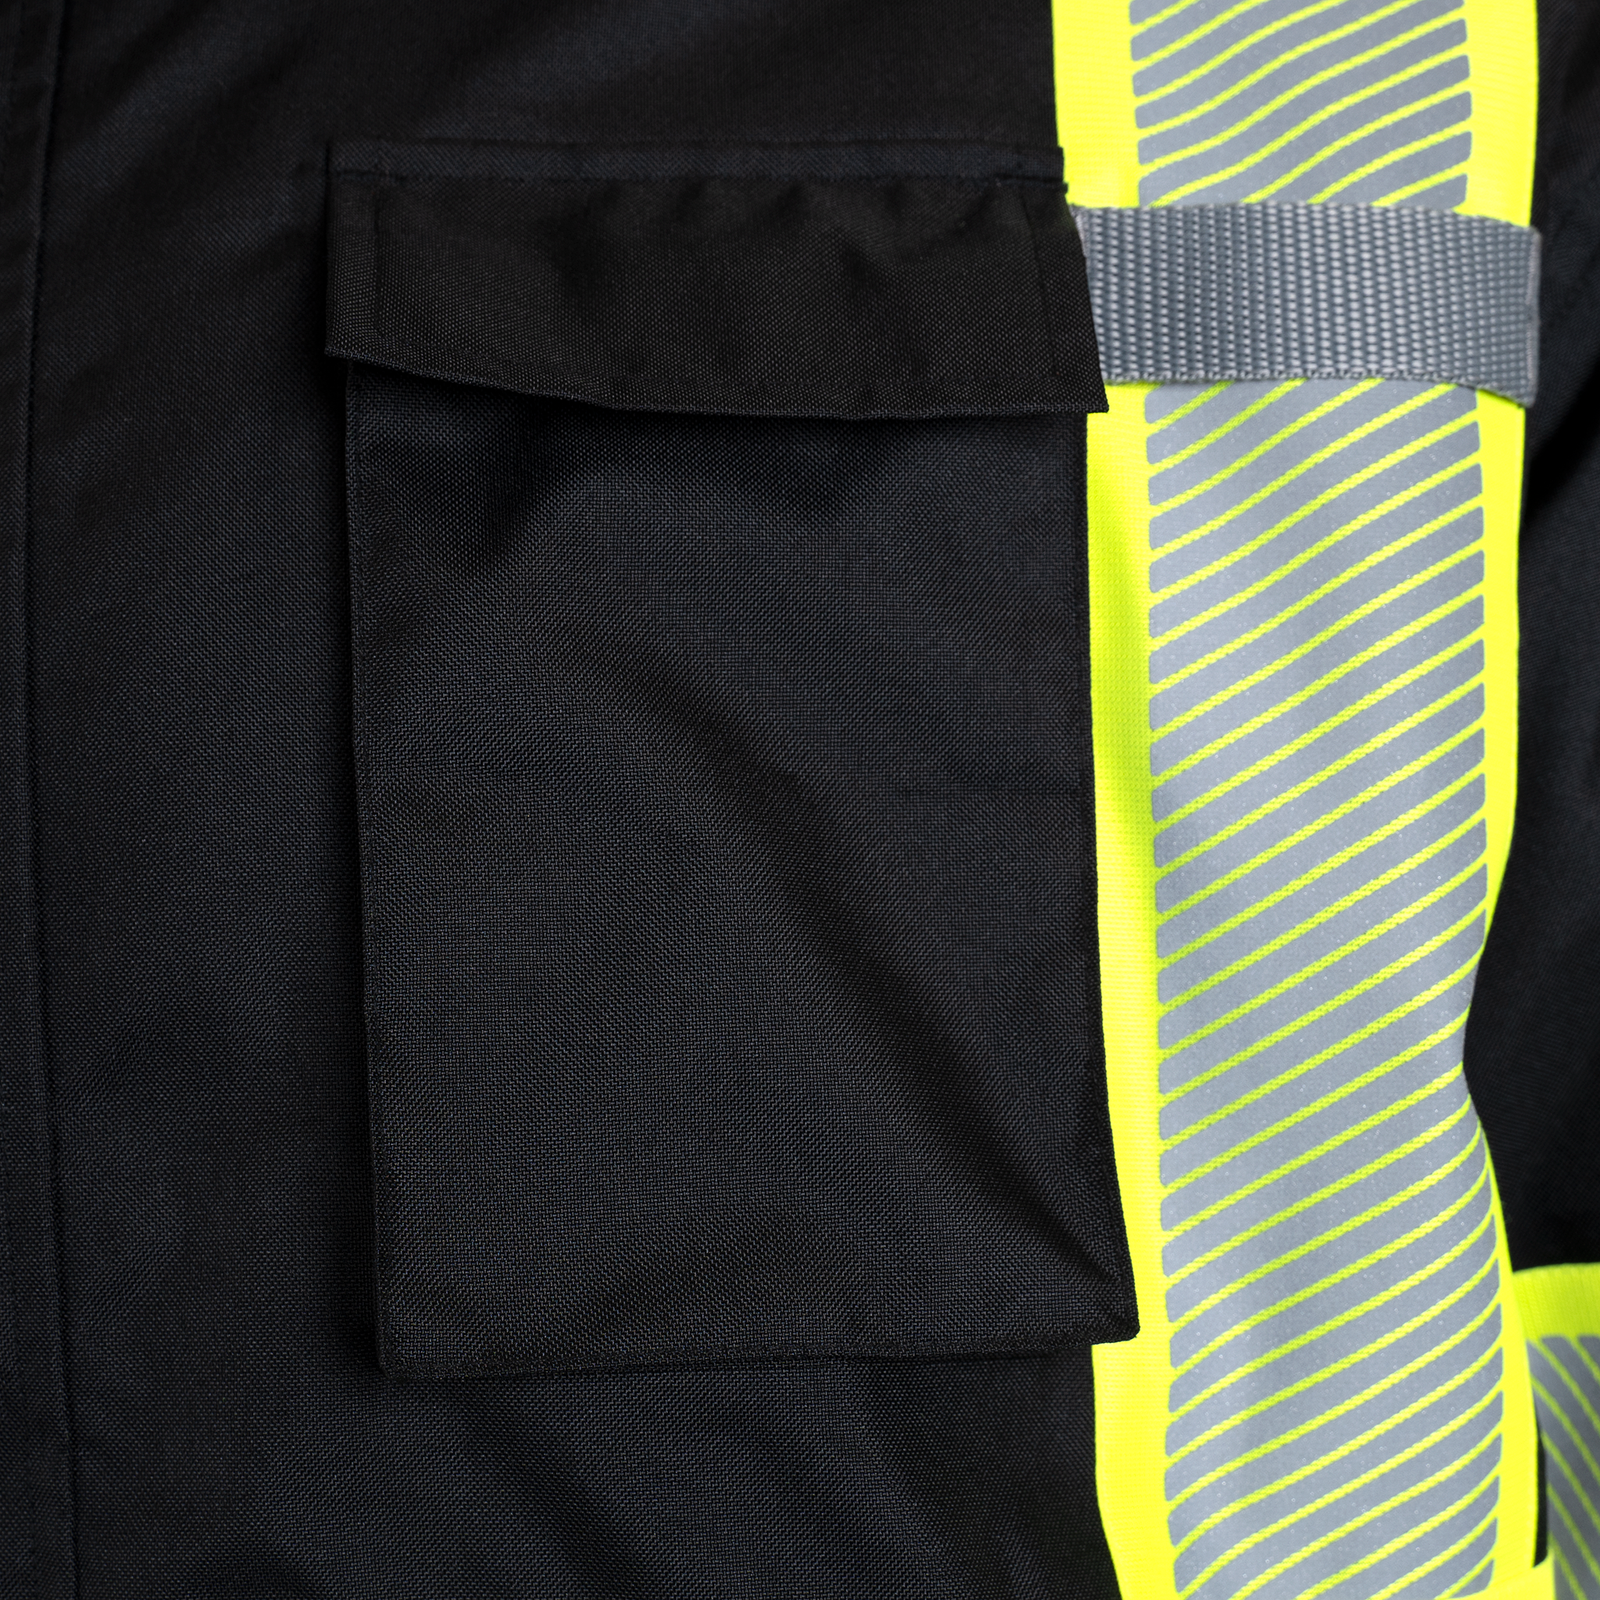 Close up shows the black reflective safety jacket with chest pocket and heat transfer tapes